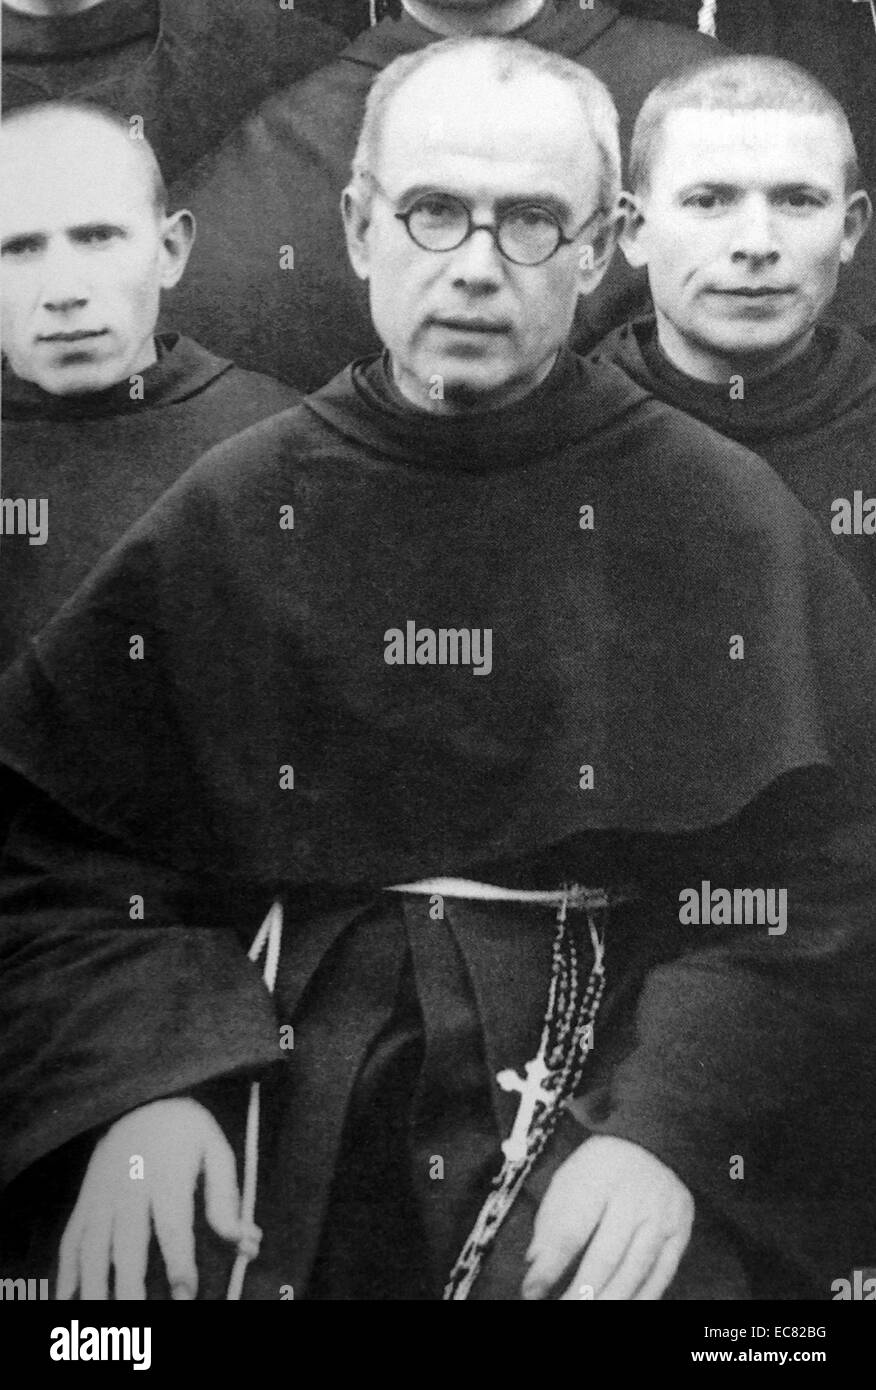 Saint Maximilian Maria Kolbe, 1894 – 14 August 1941. Polish Franciscan friar, who volunteered to die in place of a stranger in the Nazi German death camp of Auschwitz, during World War II. Stock Photo